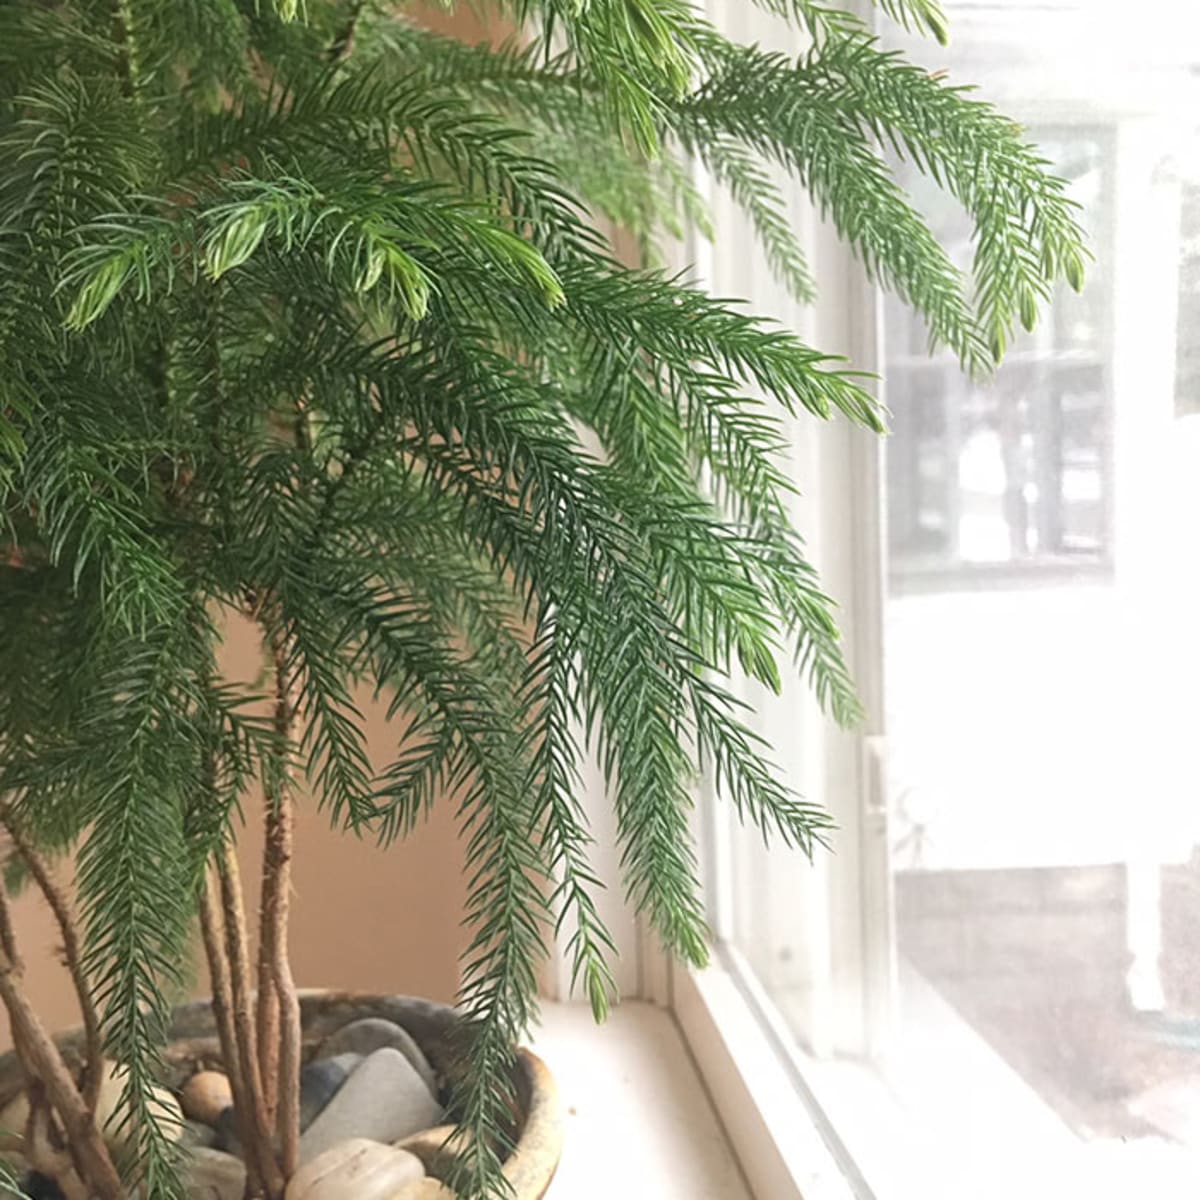 norfolk island pine for christmas and beyond - horticulture